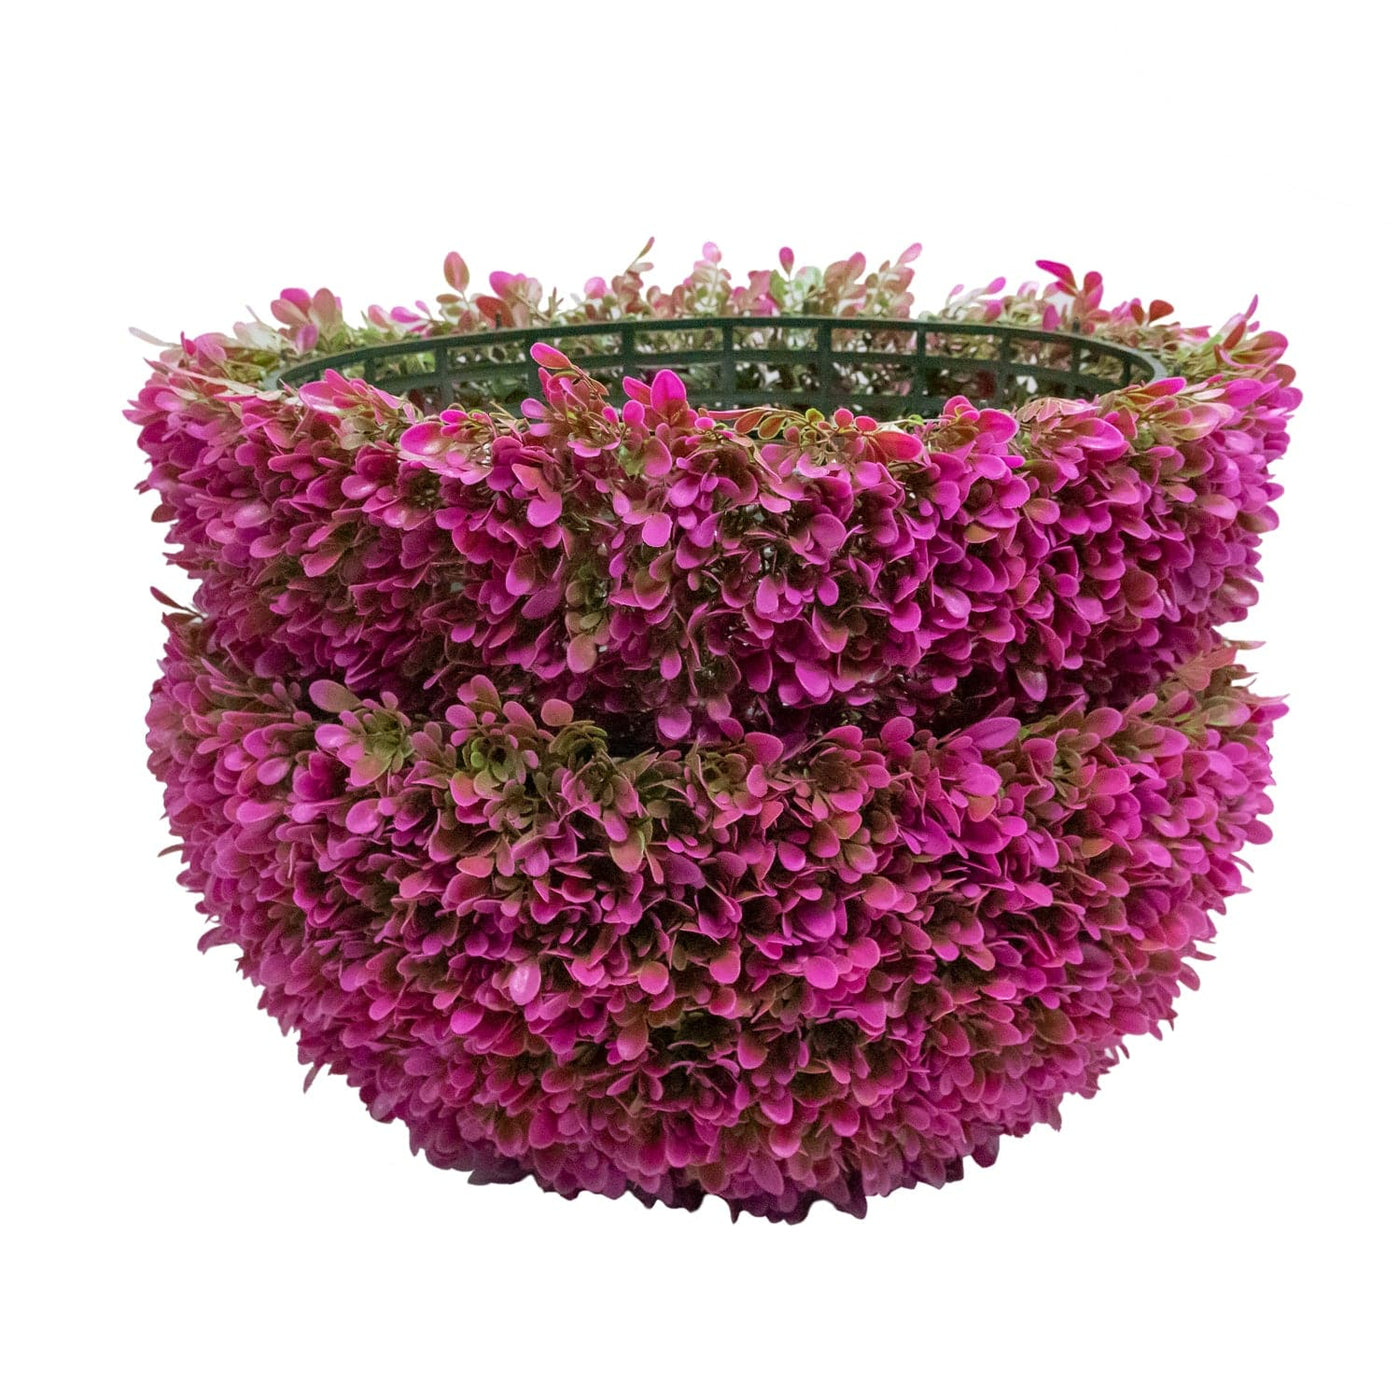 365 Curb Appeal Topiary ball 16" size large - Set of 2 Large Pink Topiary Balls